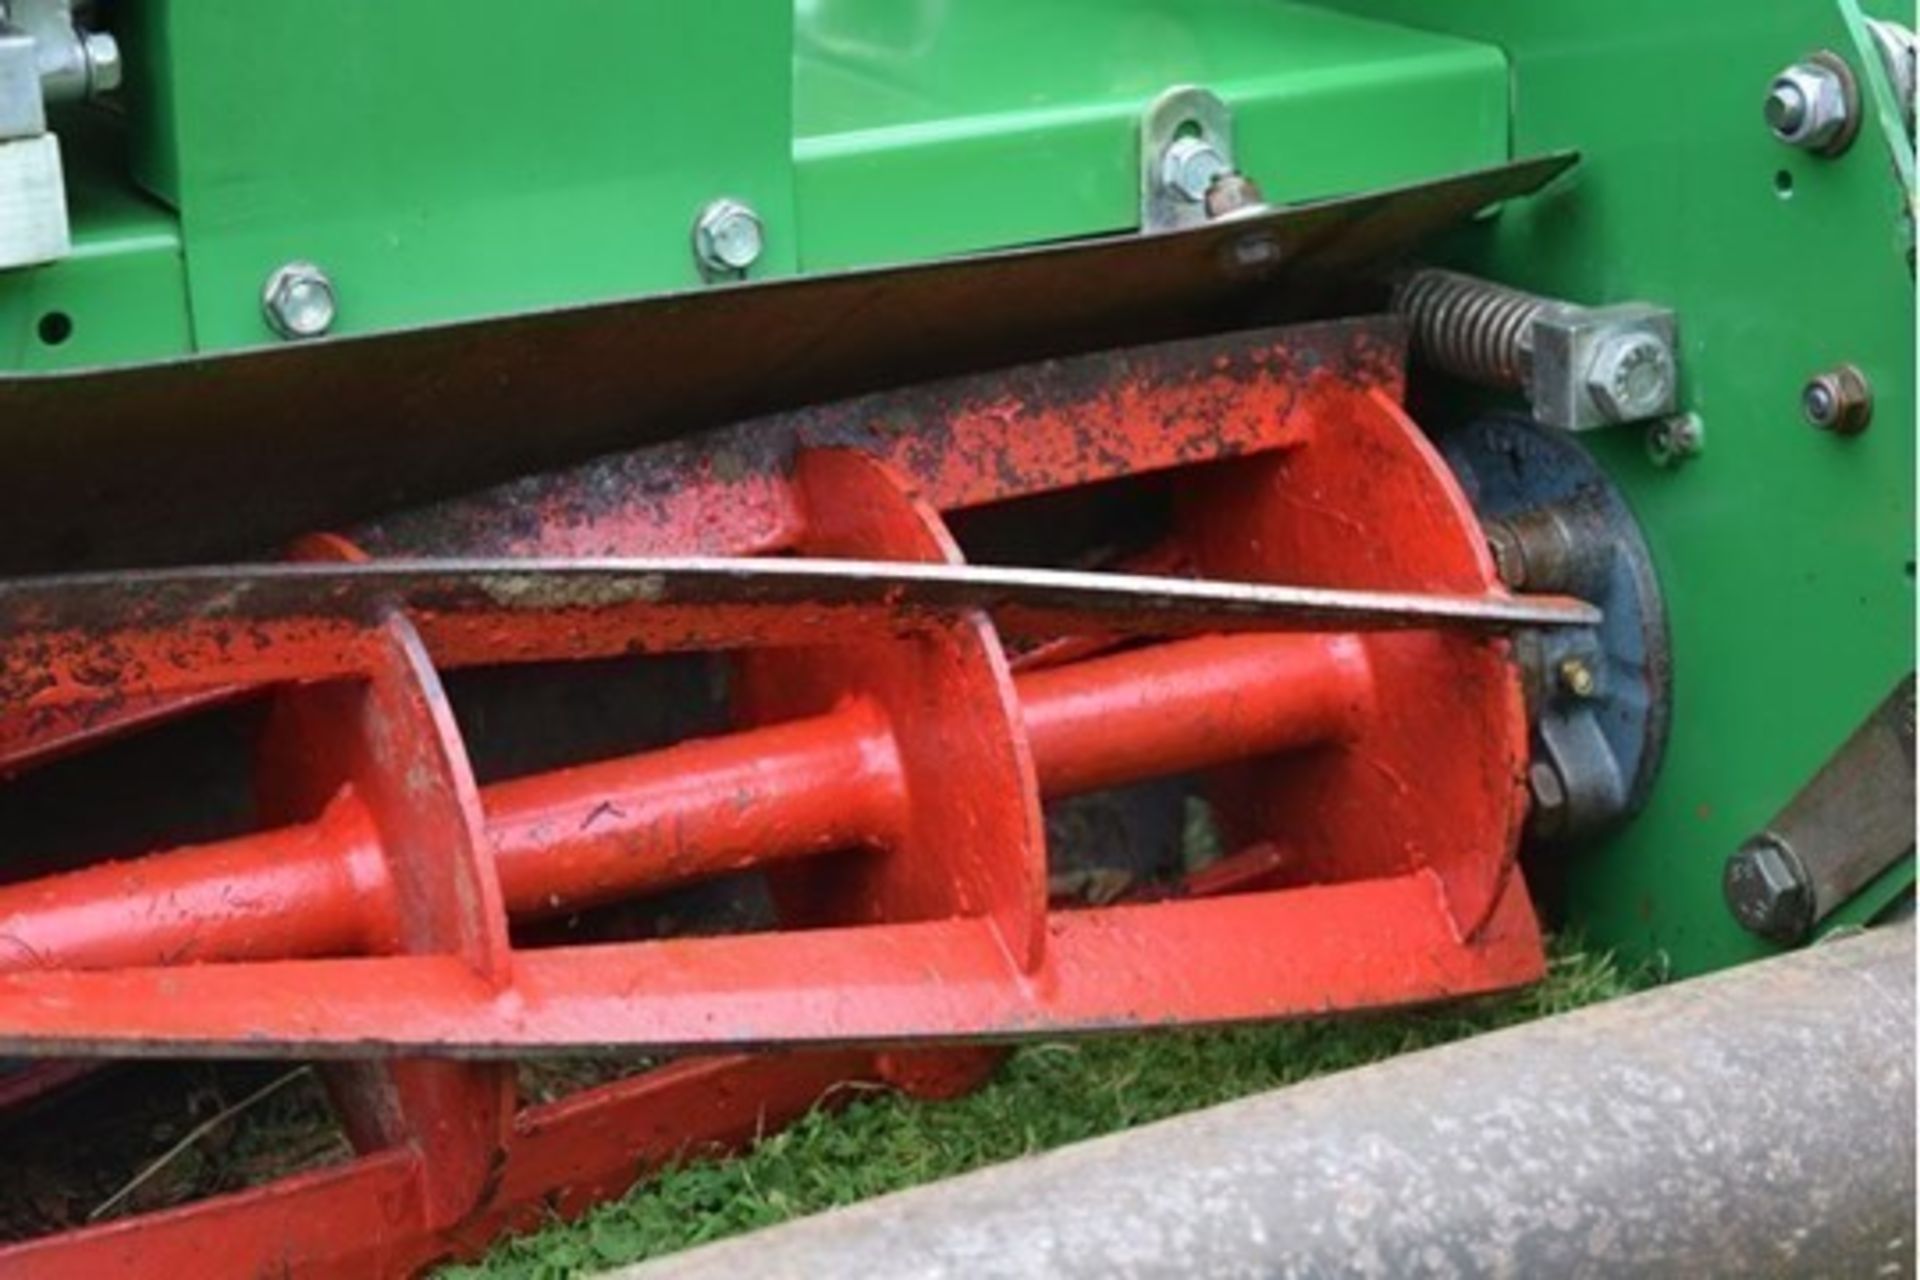 2004 Dennis G560 5 Blade Cylinder Mower With Grass Box - Image 6 of 12